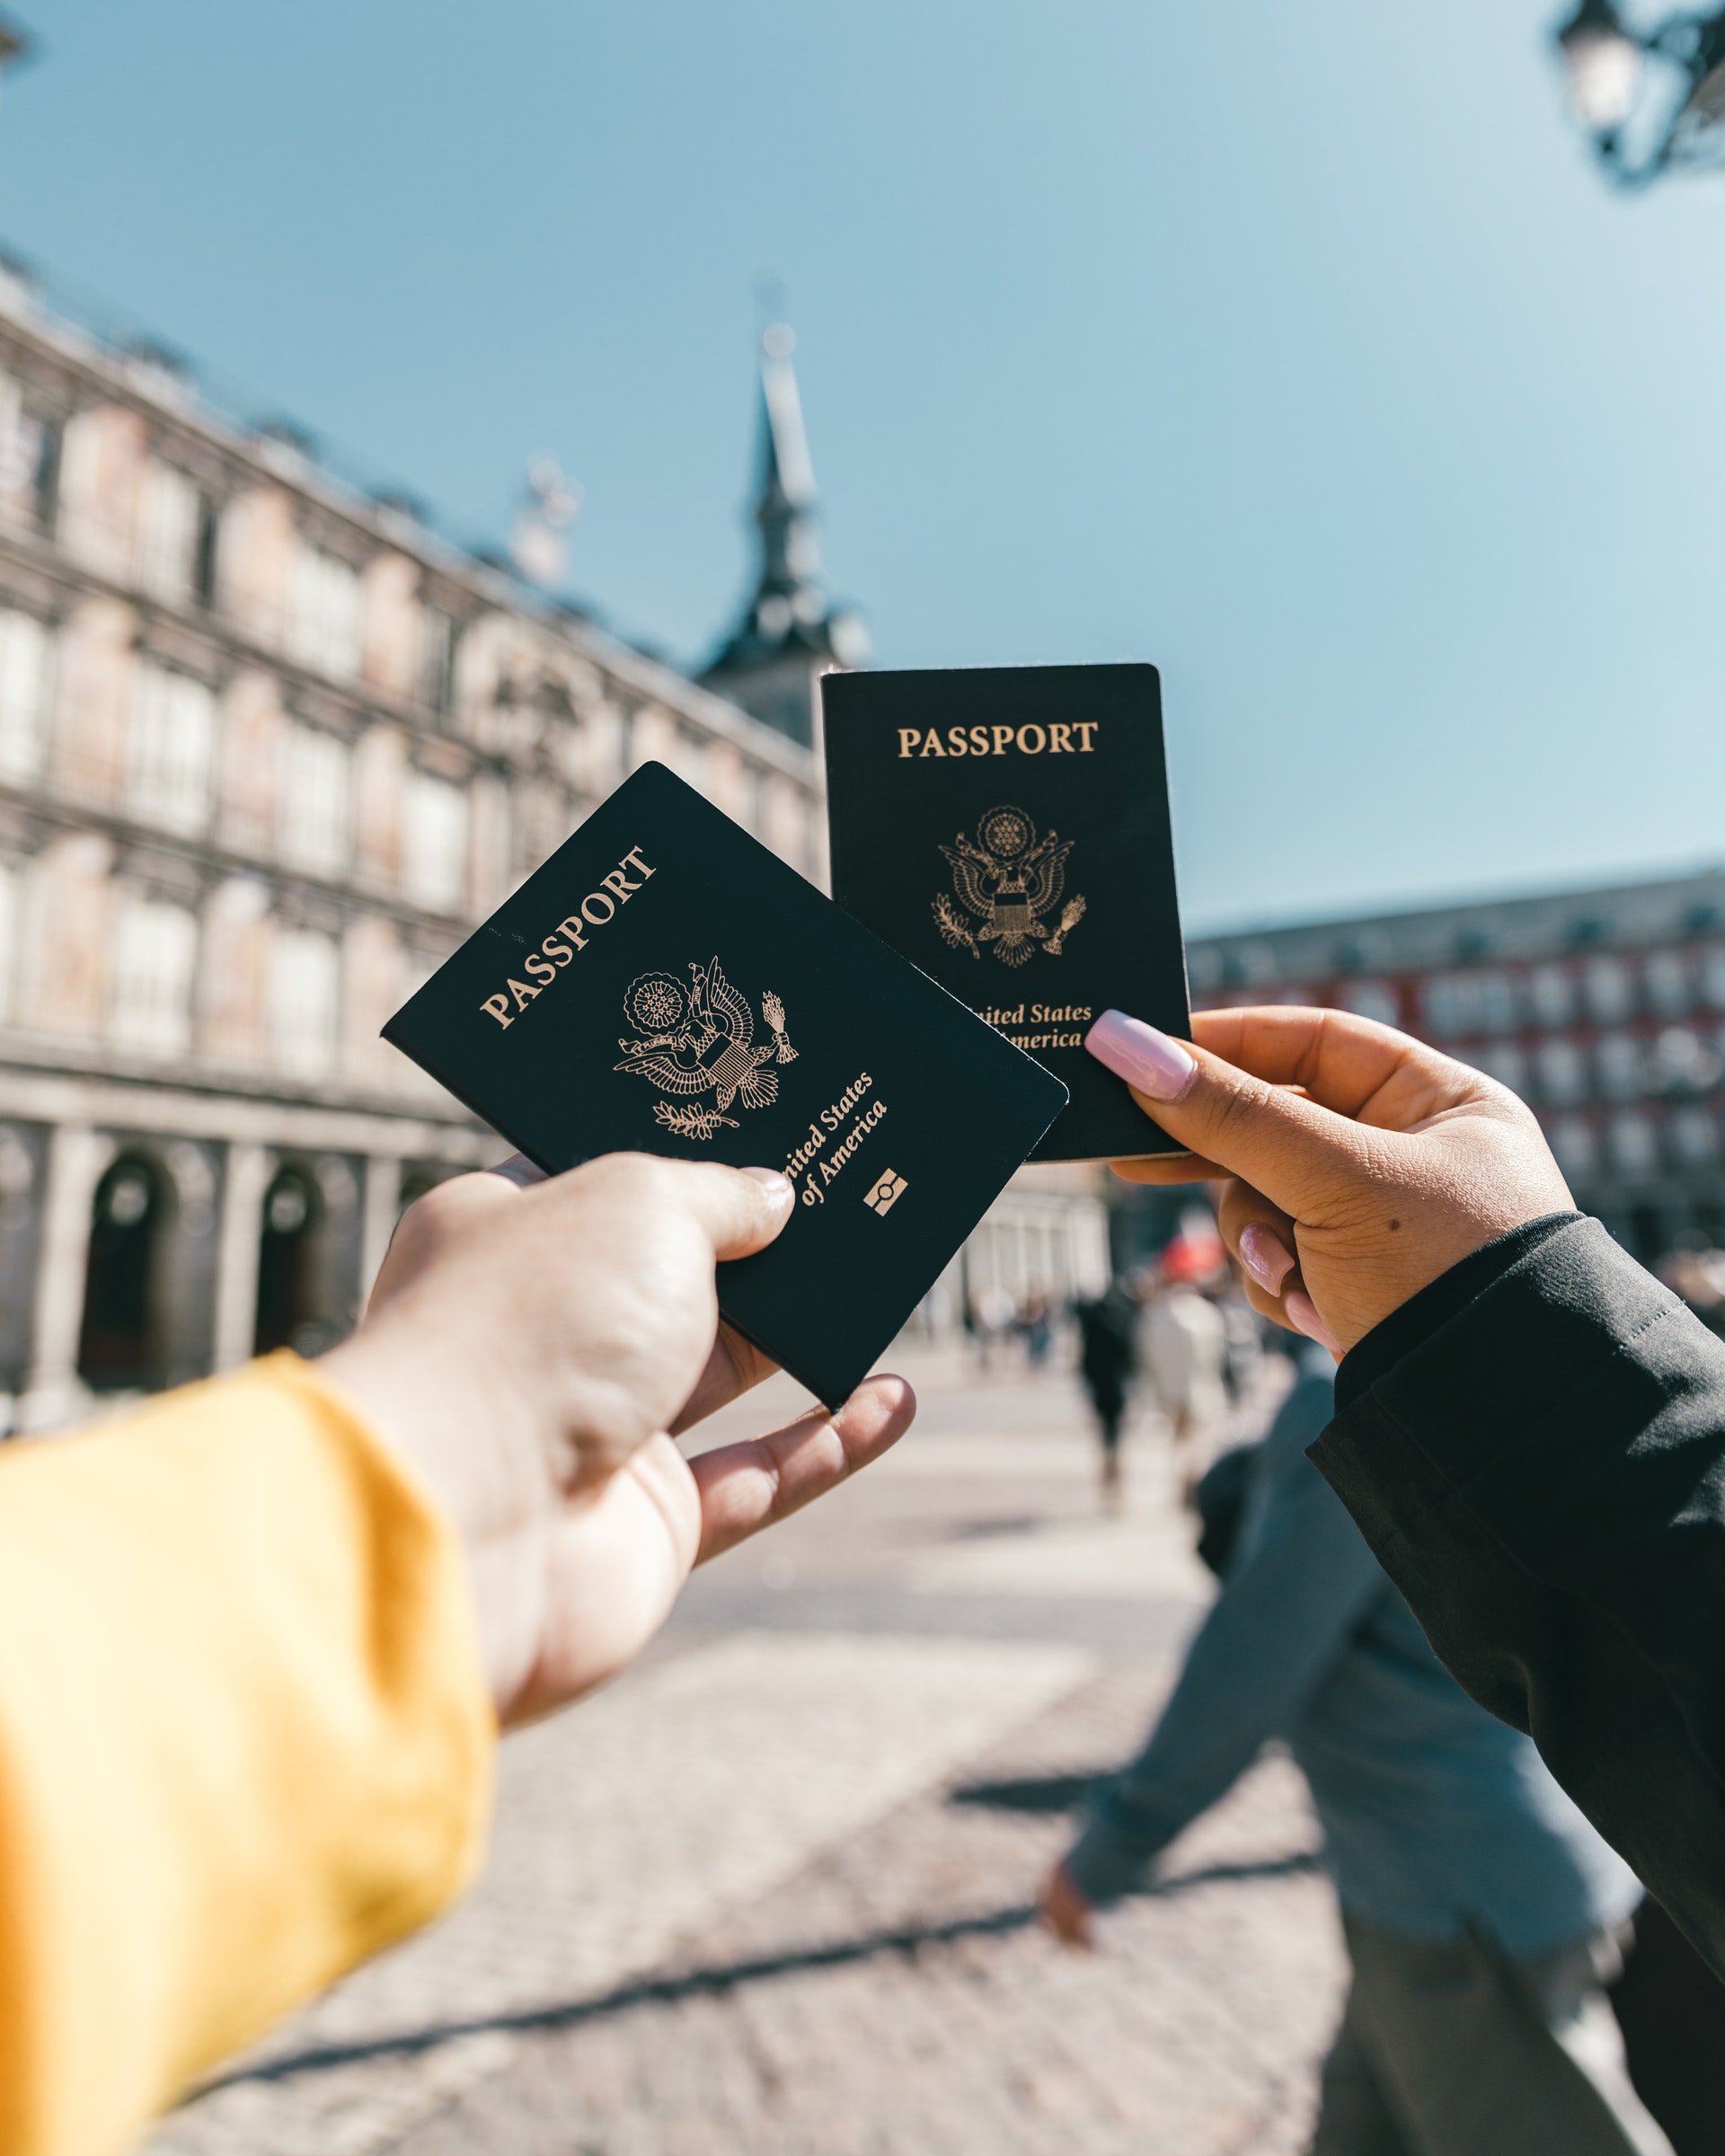 Image of two hands holding US Passports on a sunny day